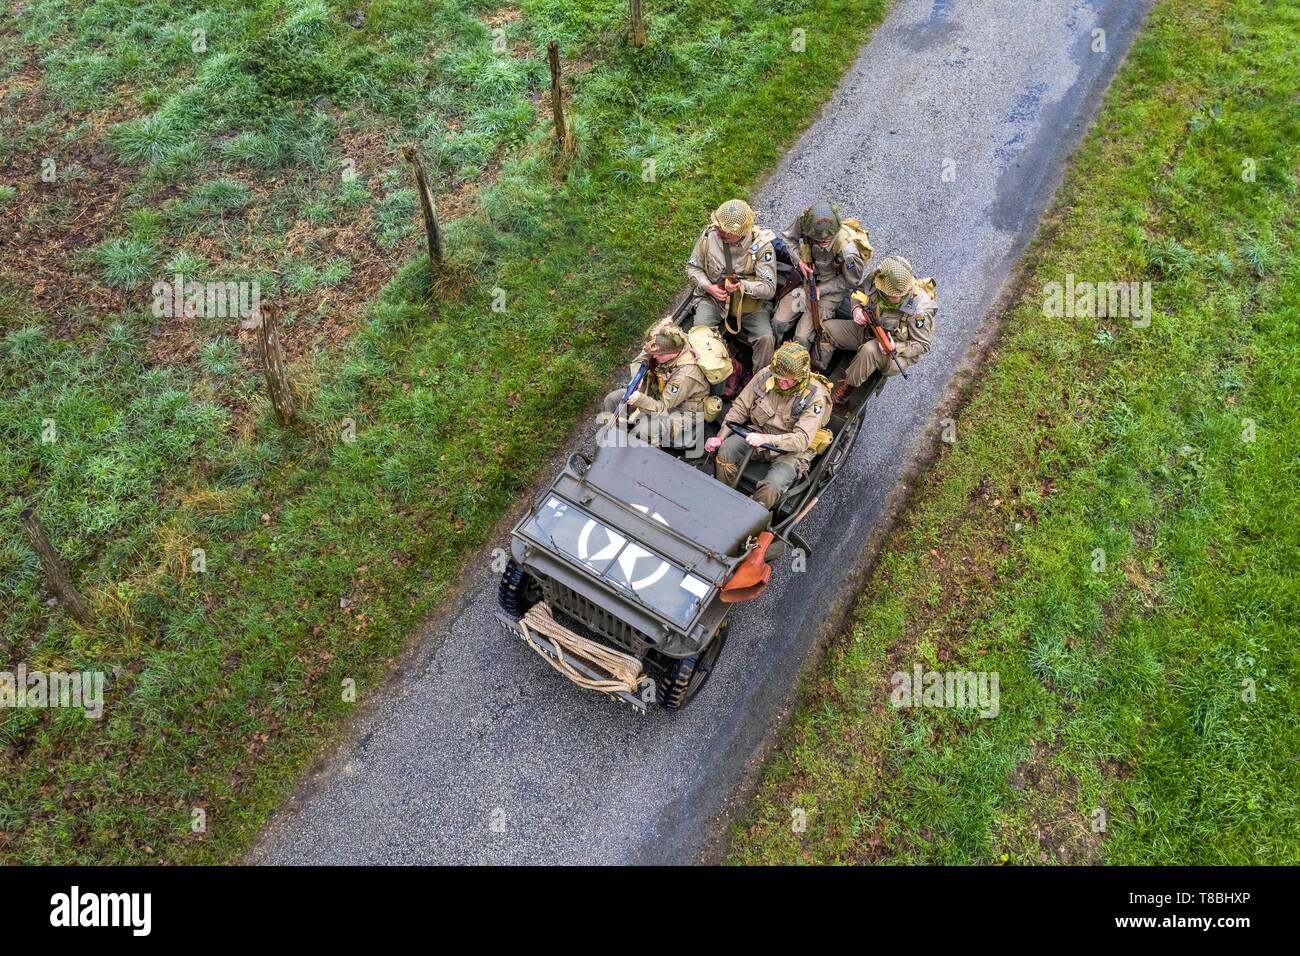 France, Eure, Sainte Colombe prÚs Vernon, Allied Reconstitution Group (US World War 2 and french Maquis historical reconstruction Association), reenactors in uniform of the 101st US Airborne Division progressing in a jeep Willys (aerial view) Stock Photo